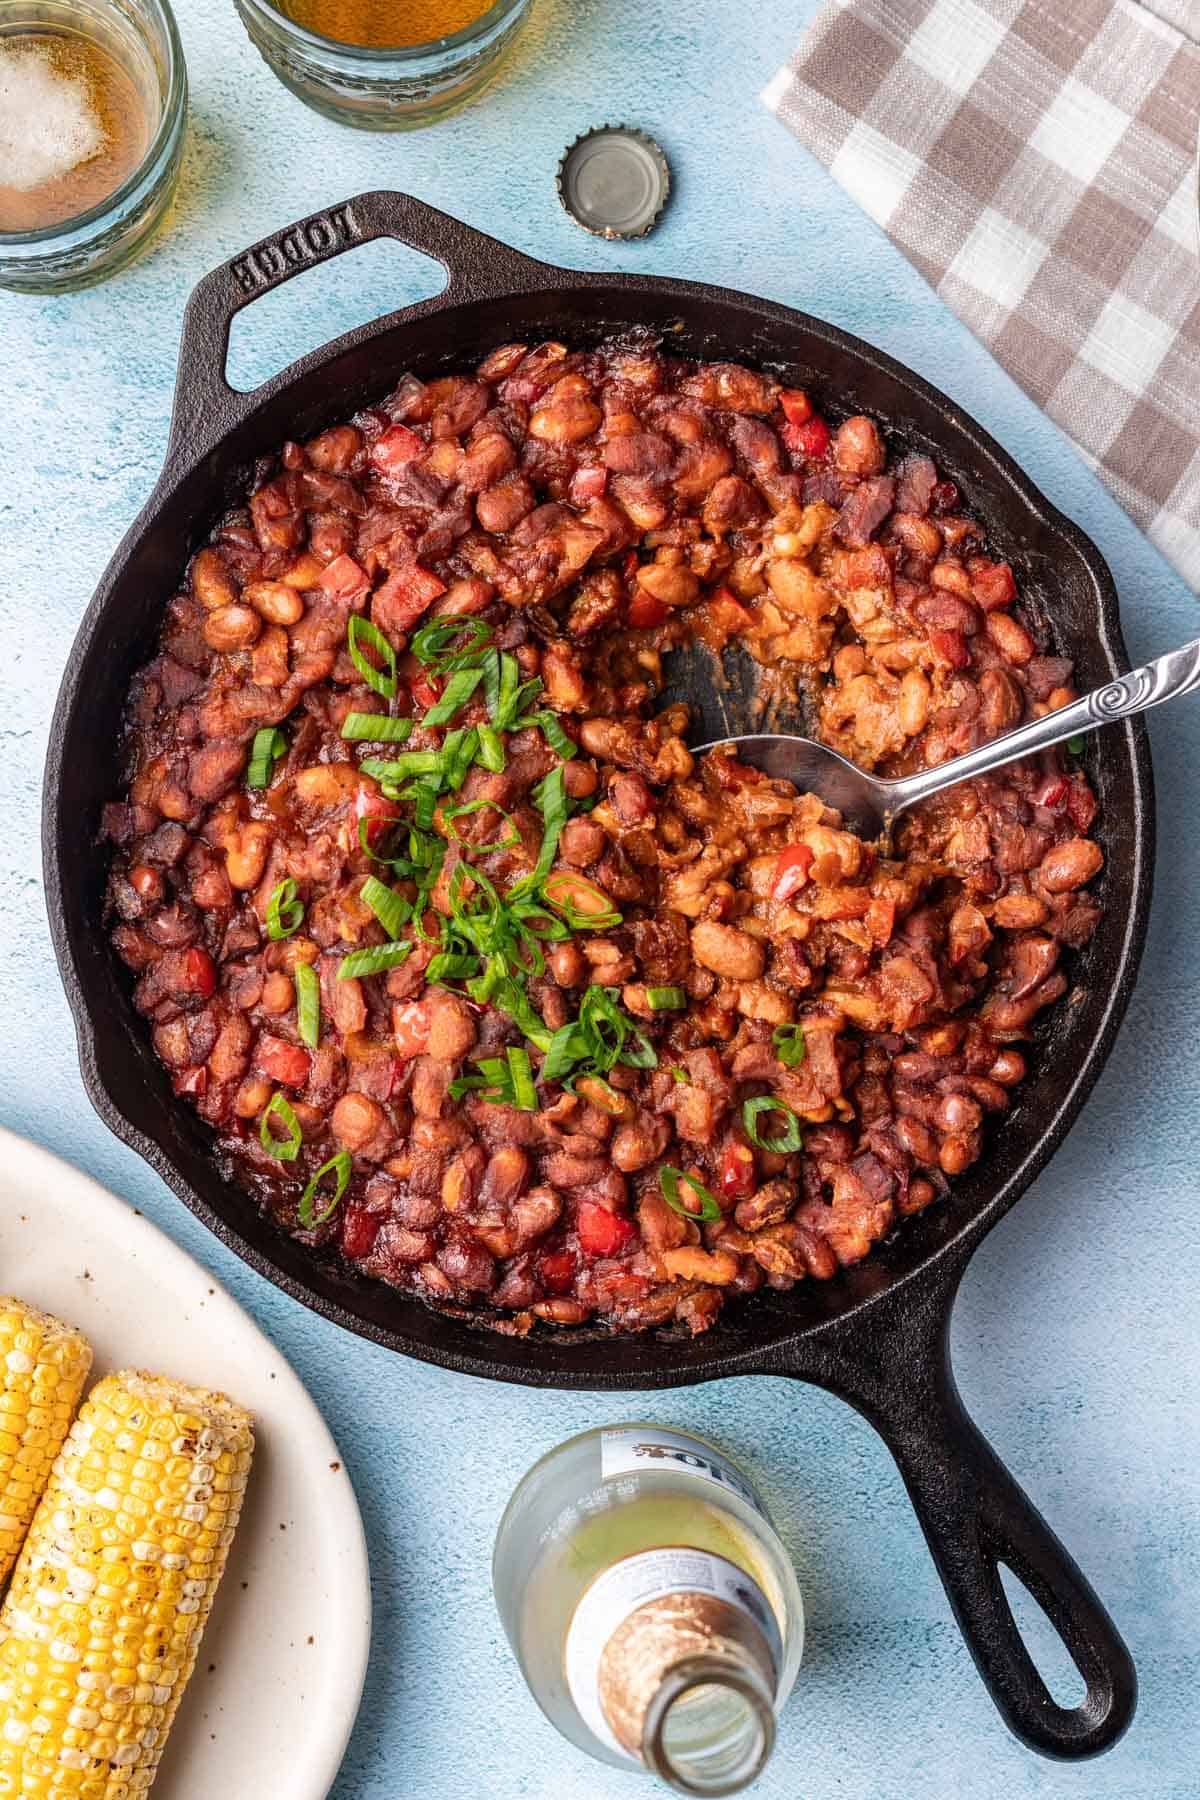 Smoked baked beans, corn, and beer ready for your next backyard get-together.